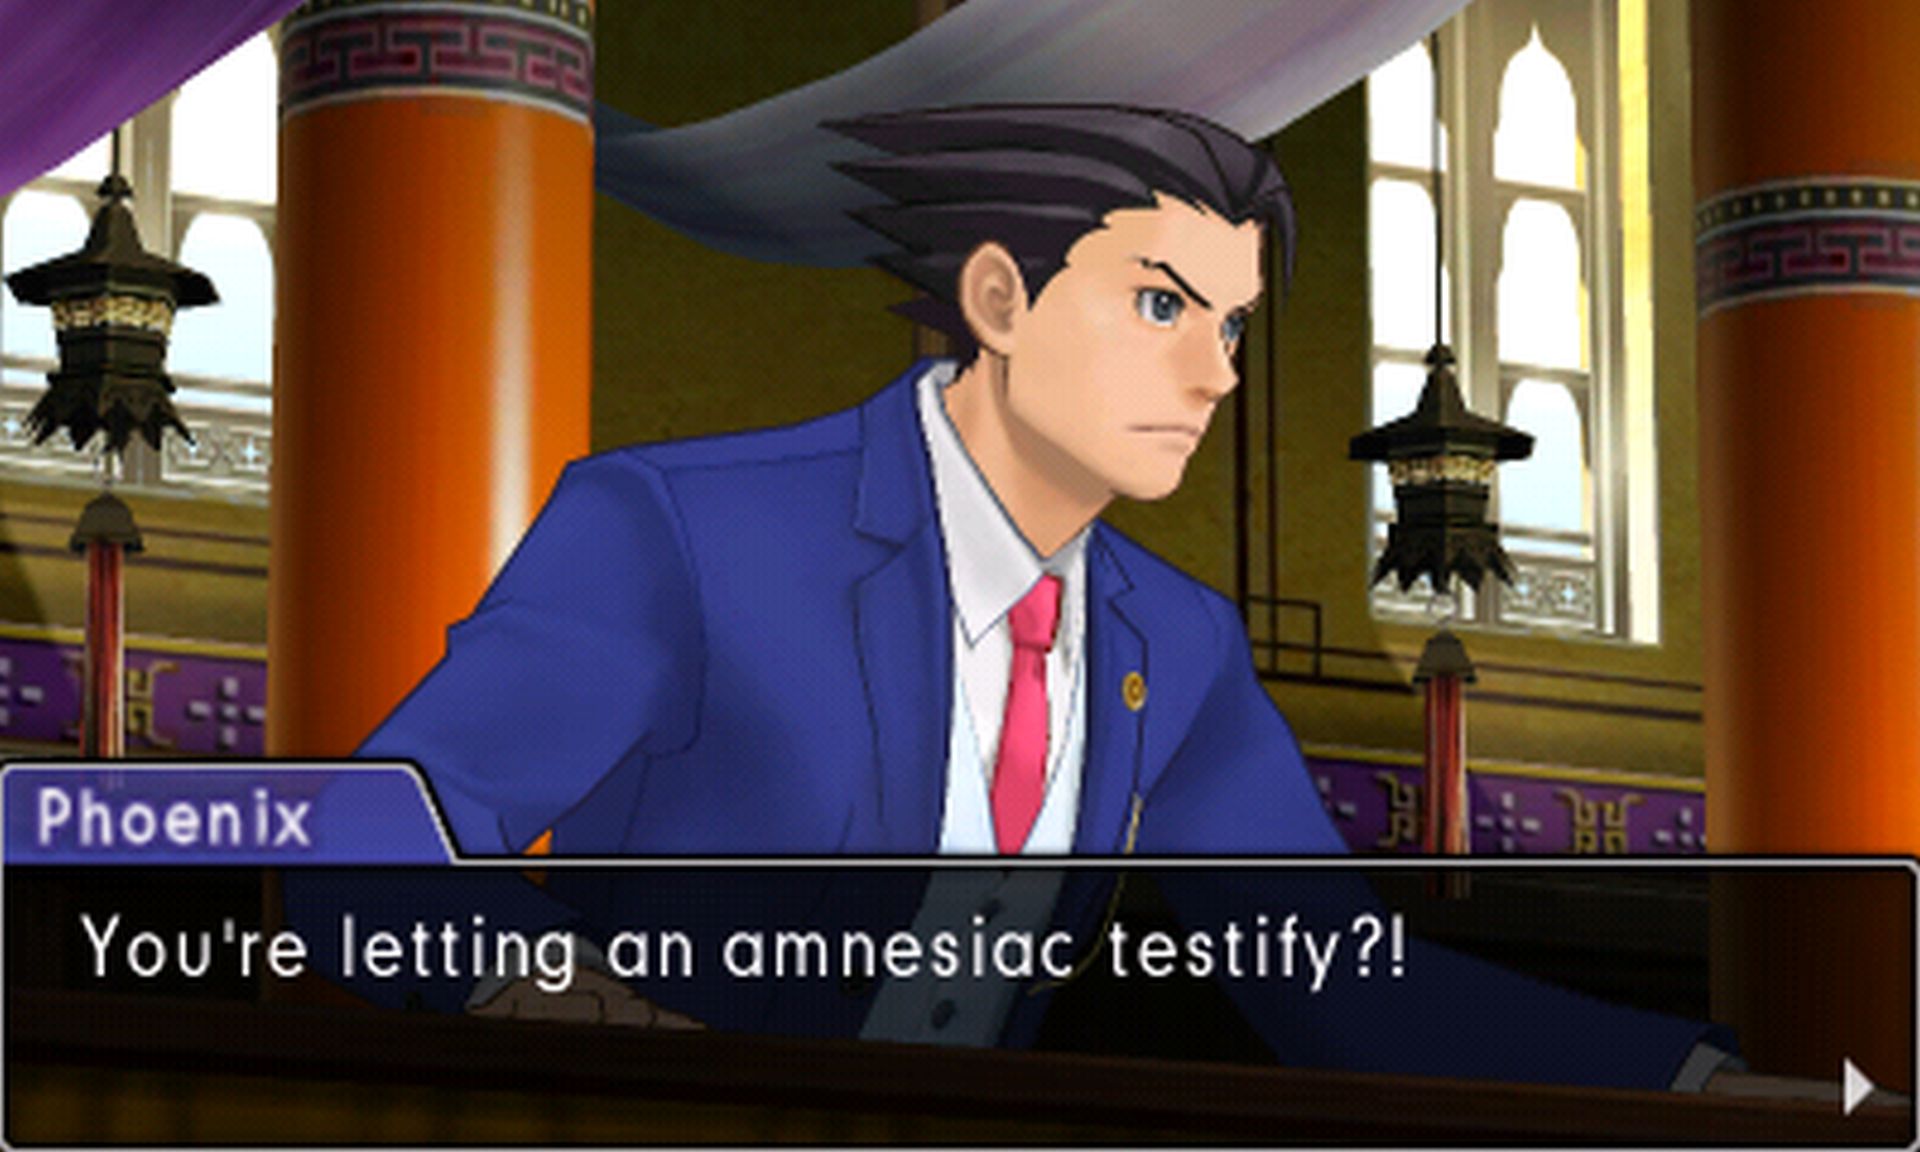 Top 10 Ace Attorney Characters  From Psychics to Powdered Wigs